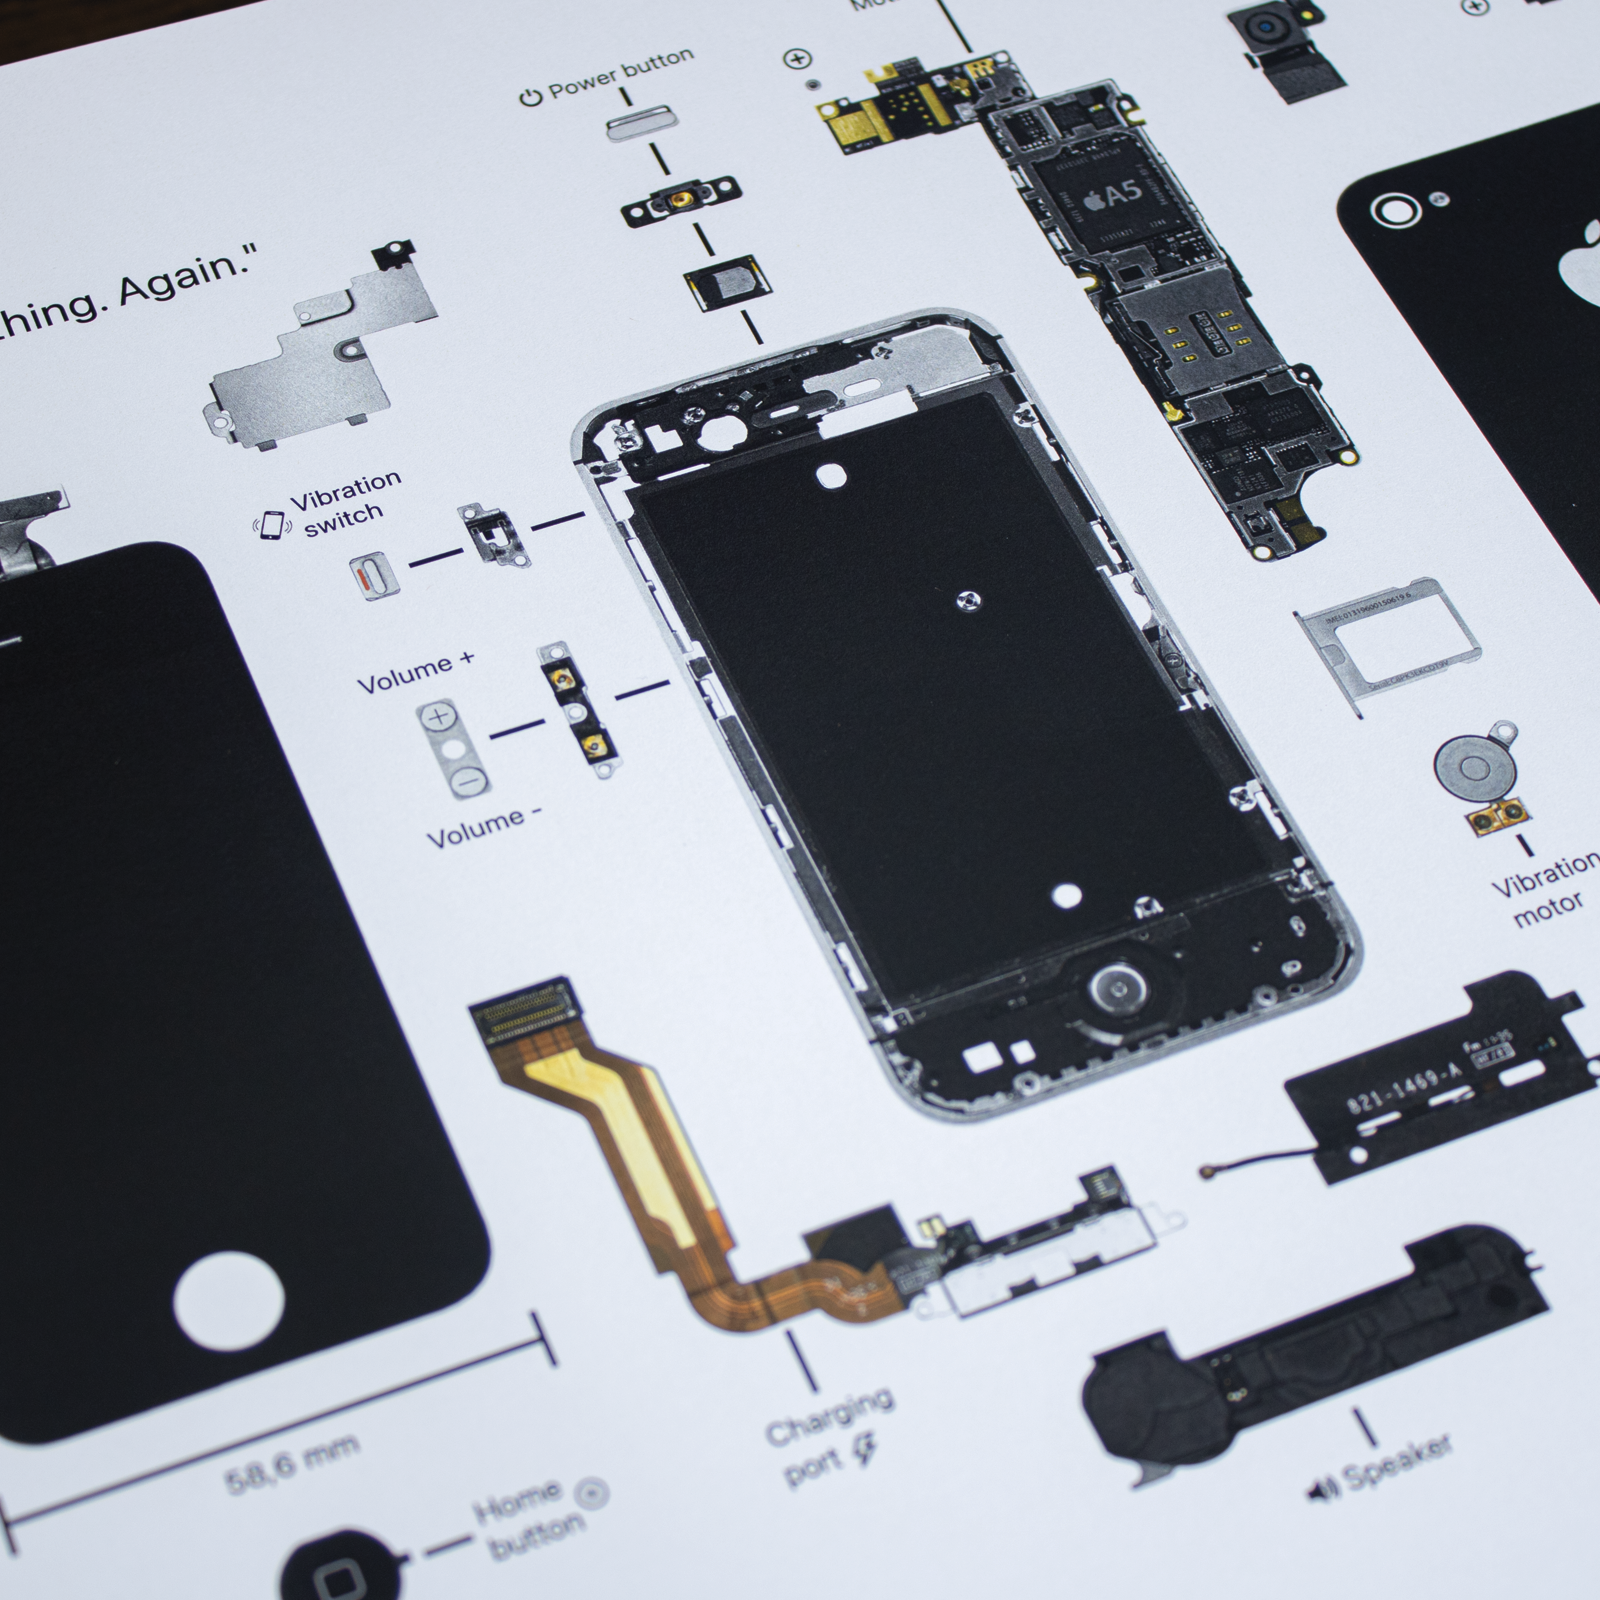 Picture frame of the iPhone 4S parts